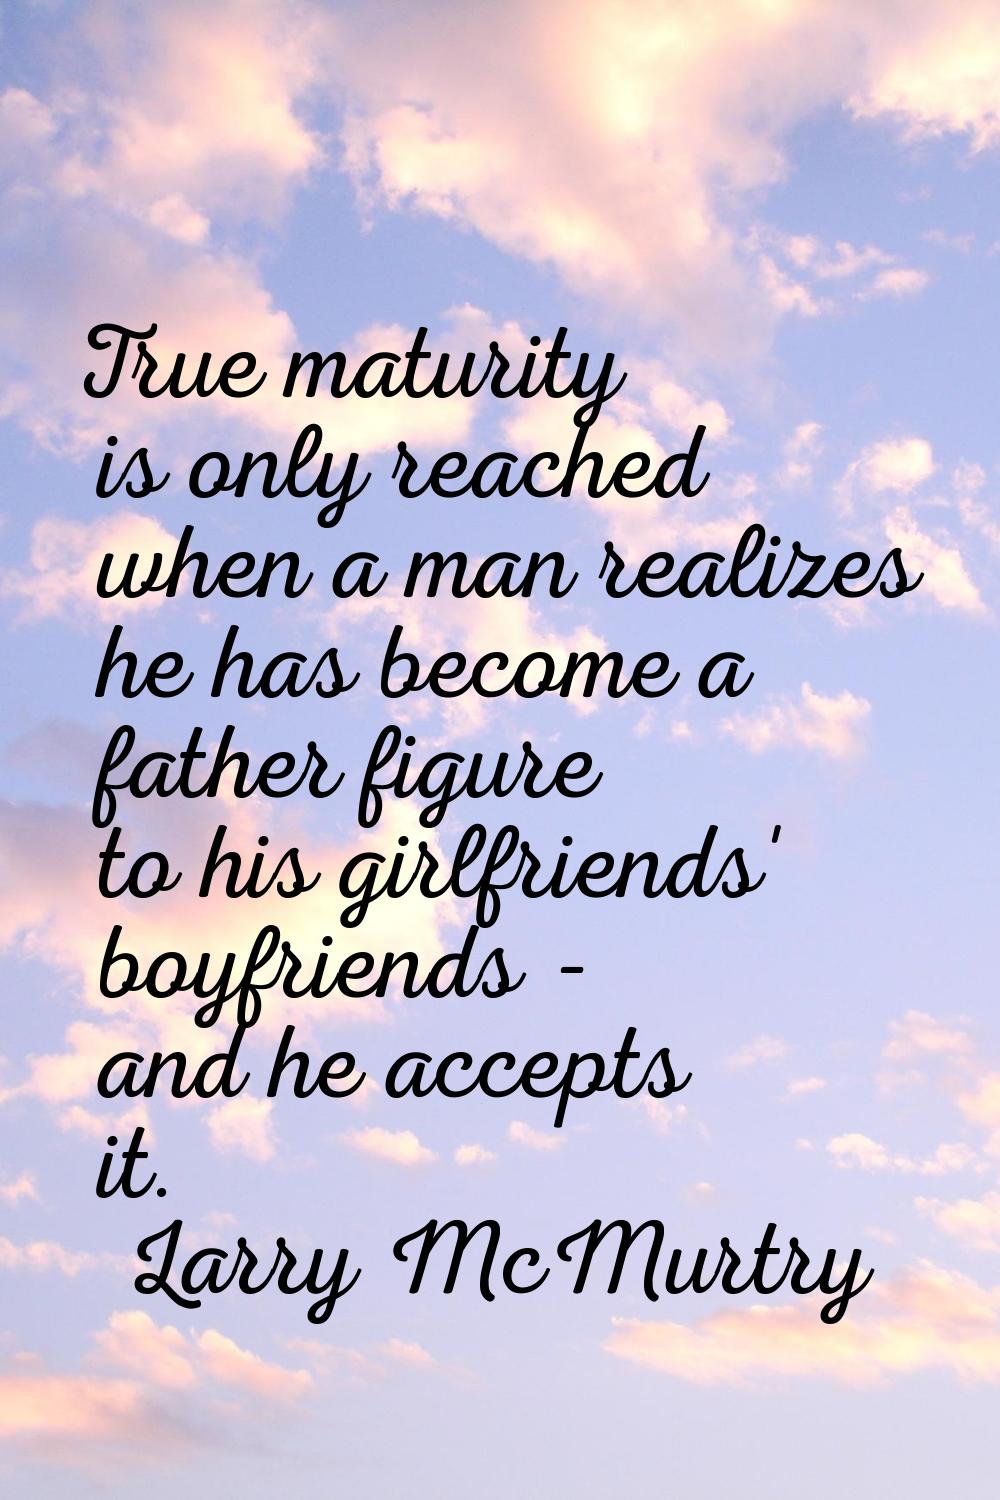 True maturity is only reached when a man realizes he has become a father figure to his girlfriends'